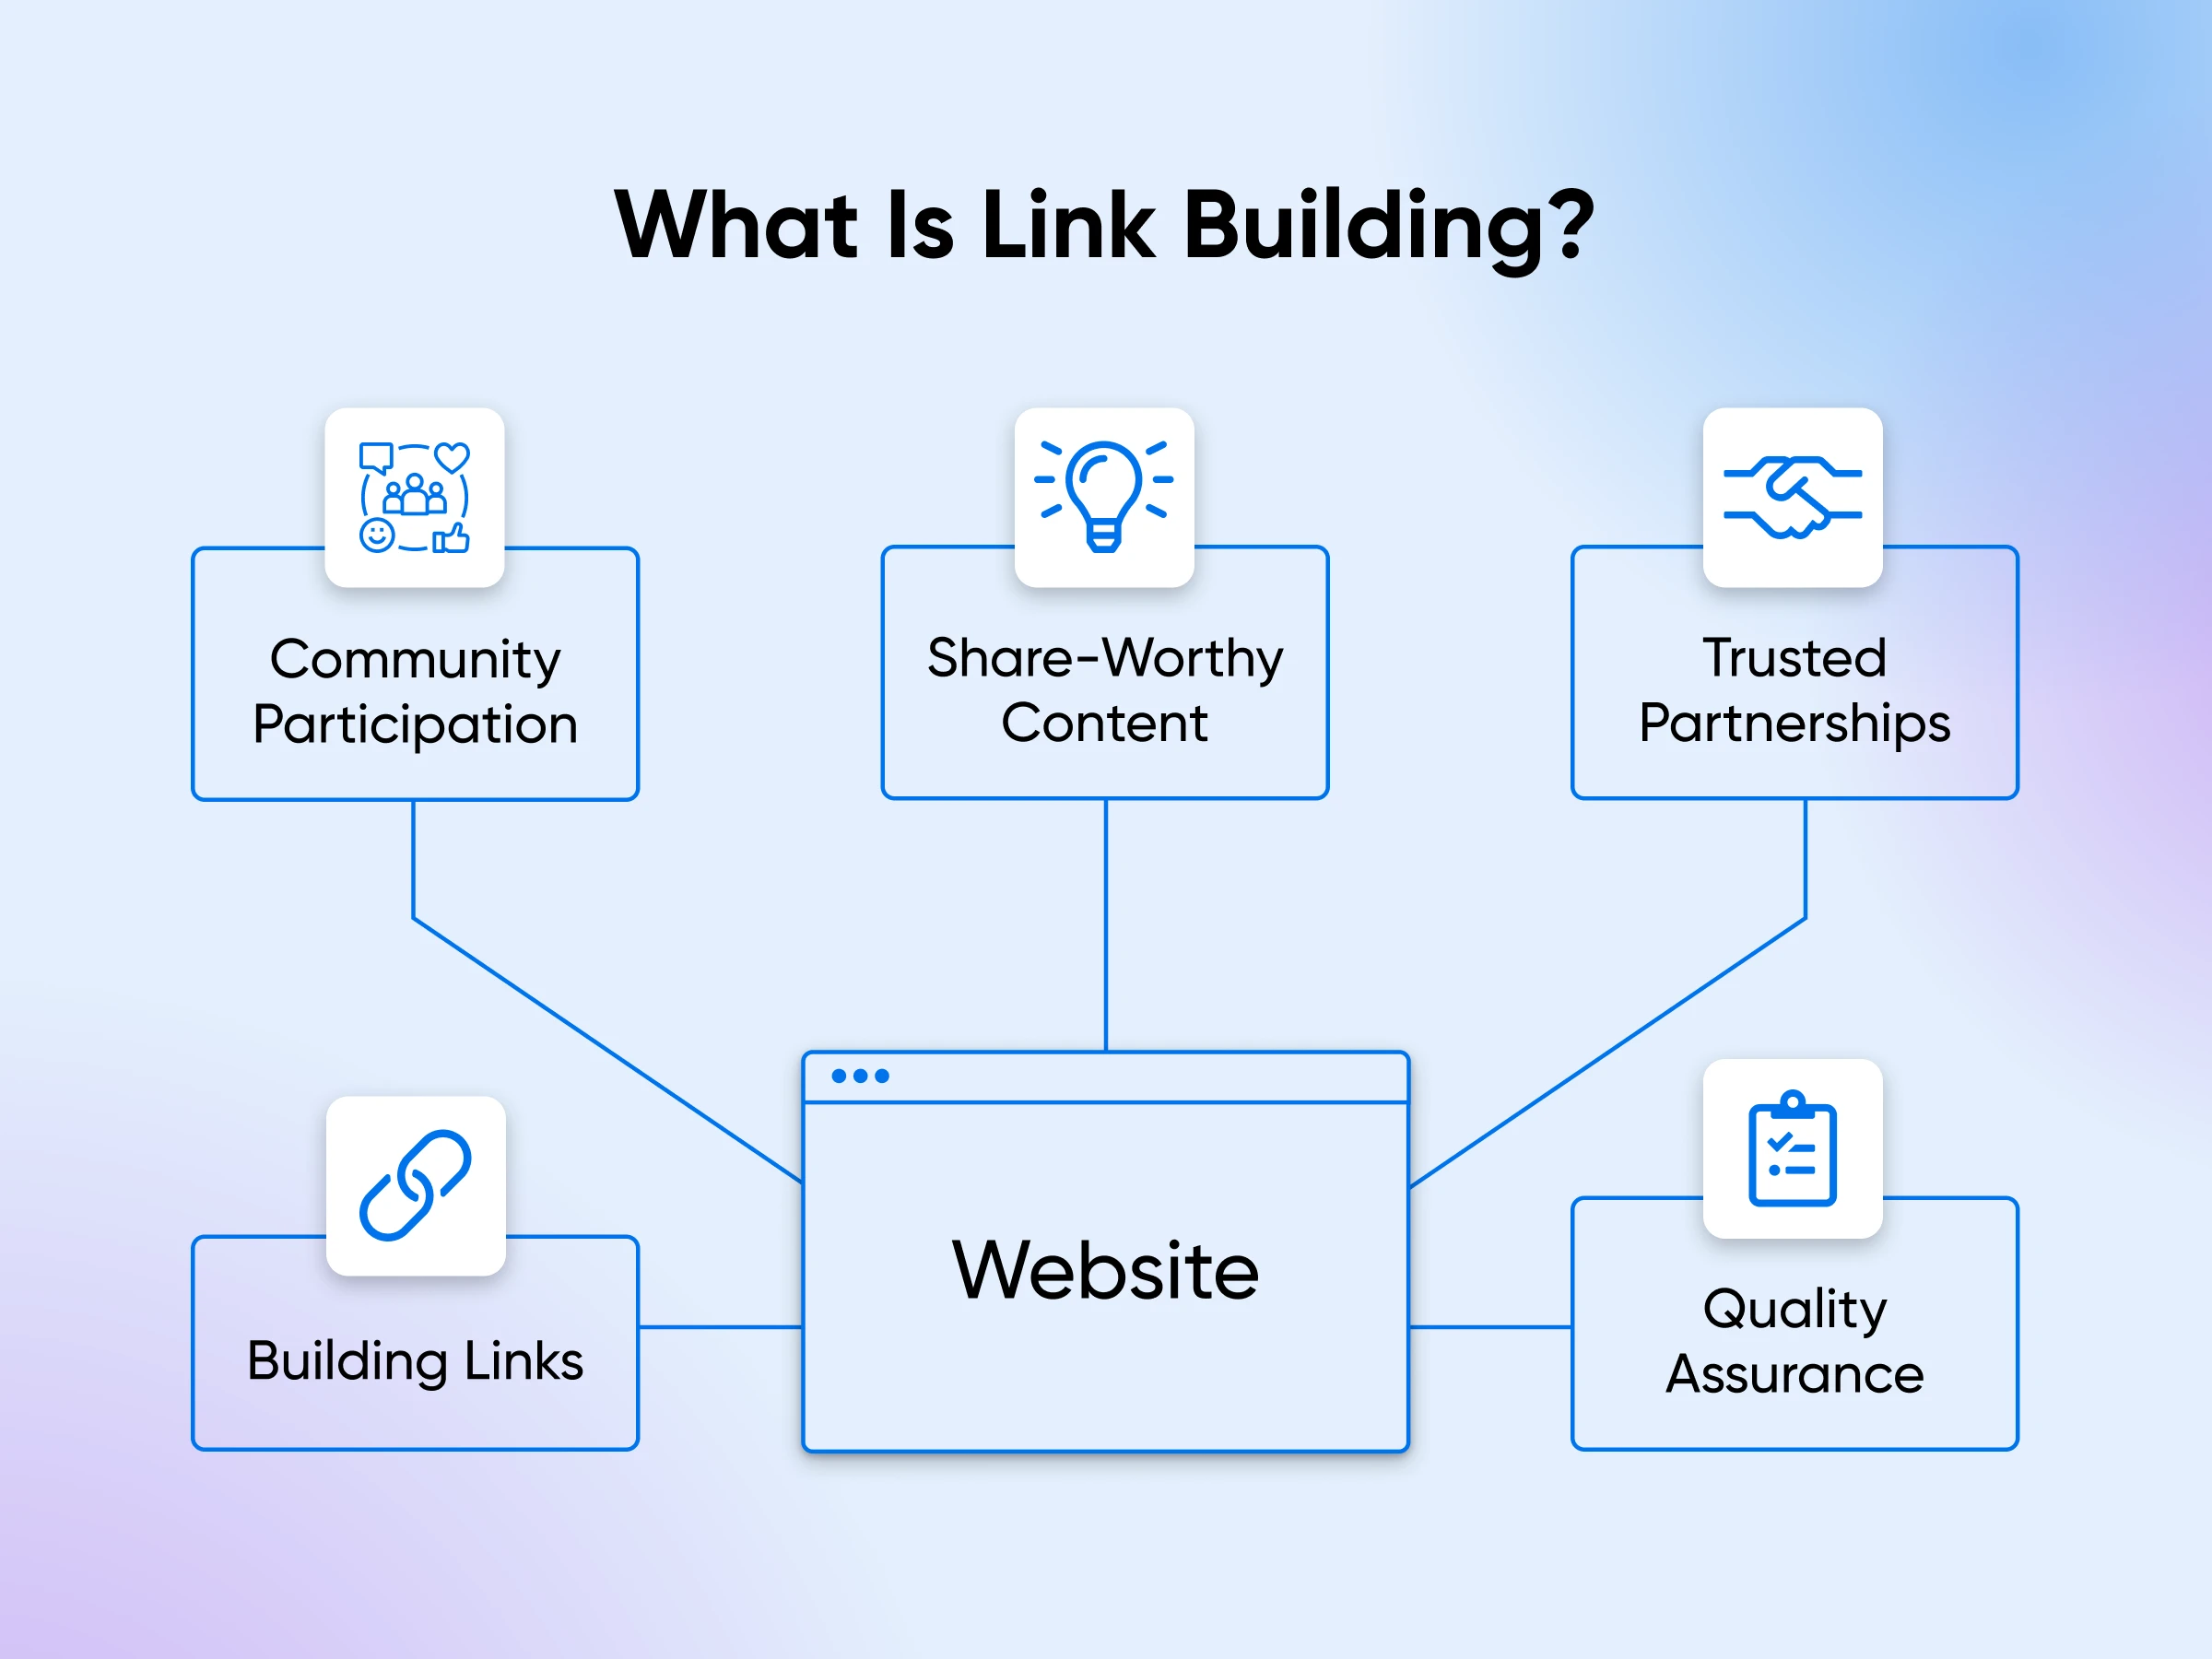 Hallmarks of effective link building in a mind map, including share-worthy content and quality assurance.